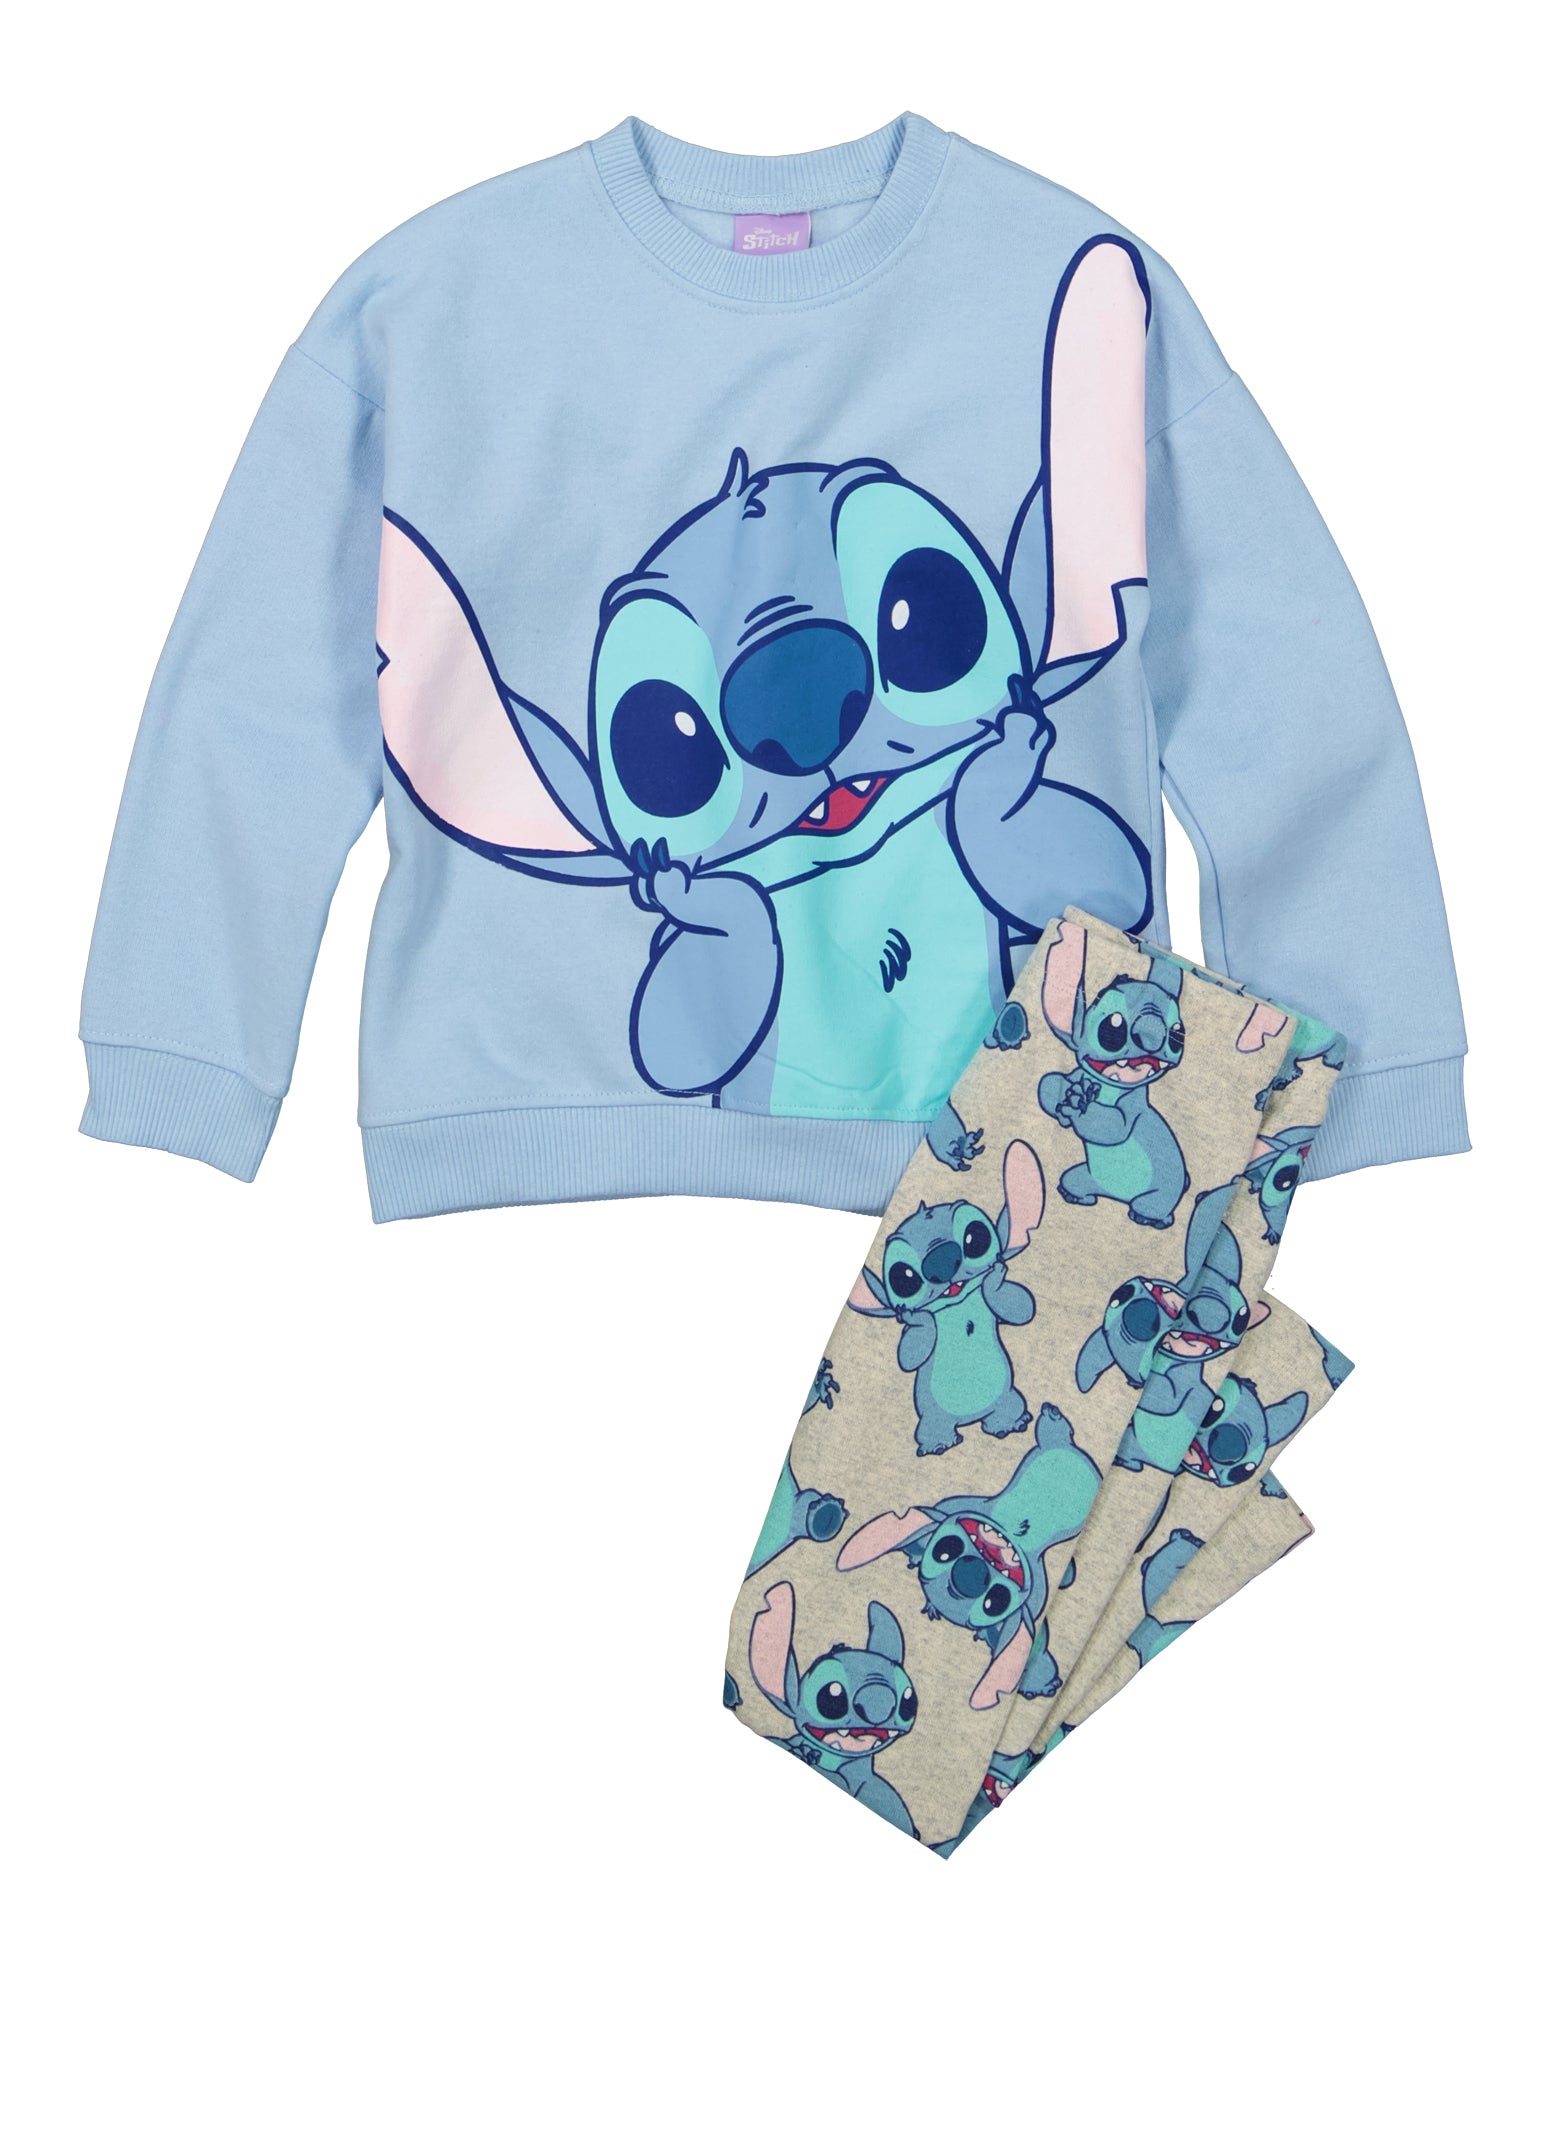 Disney Lilo & Stitch Girls T-shirt And Leggings Outfit Set Little